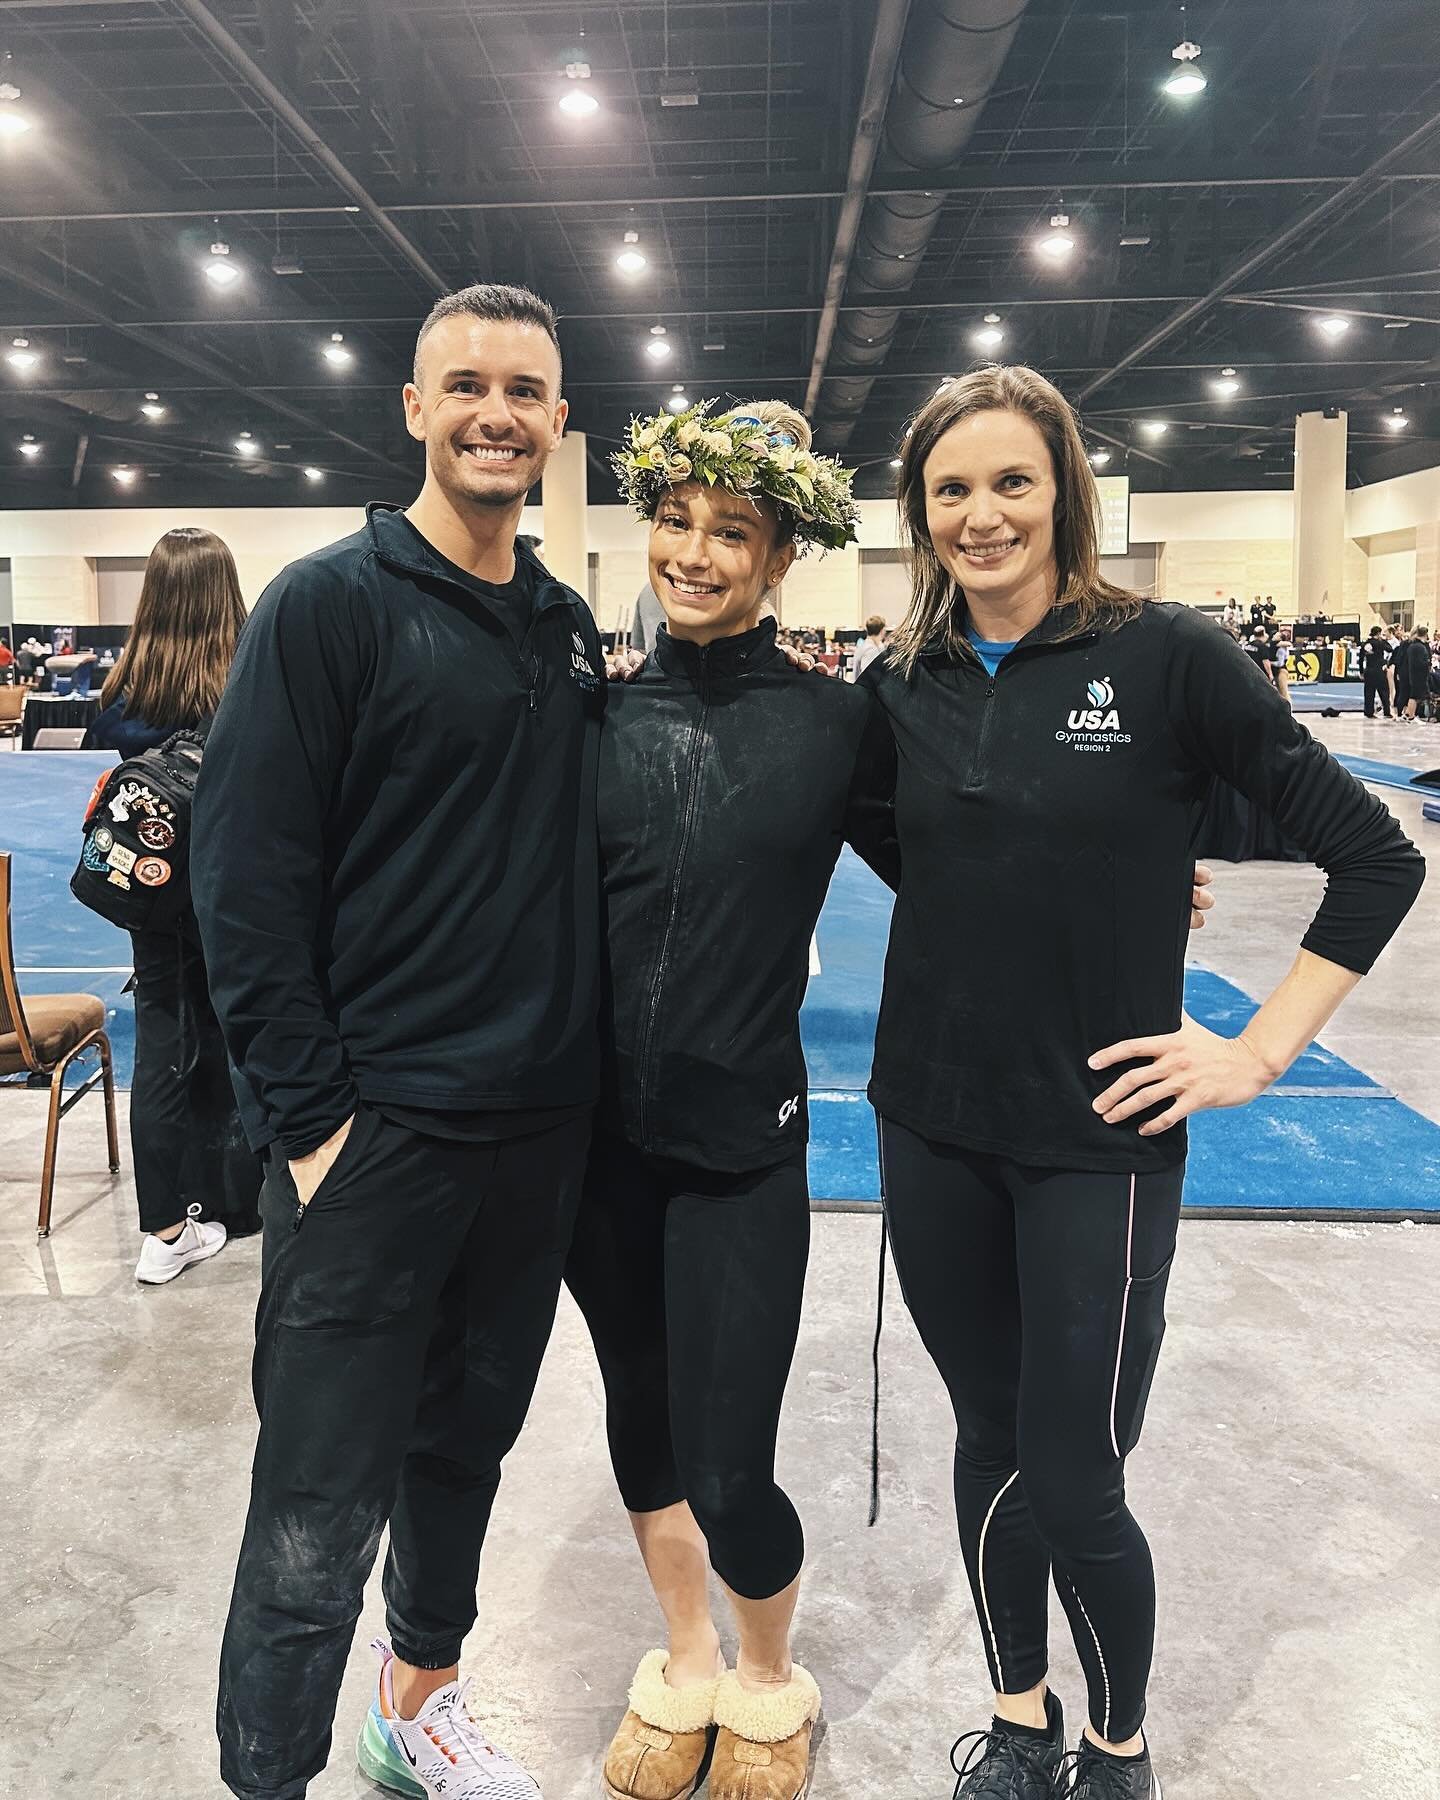 Jaime Dugan&rsquo;s grand finale to her club gymnastics career‼️

8️⃣ Bars 
🔟 All-Around

What a legacy she is leaving at Pacific Reign. A phenomenal impact on every gymnast who trains alongside her every single day. We are so proud to call her PR a